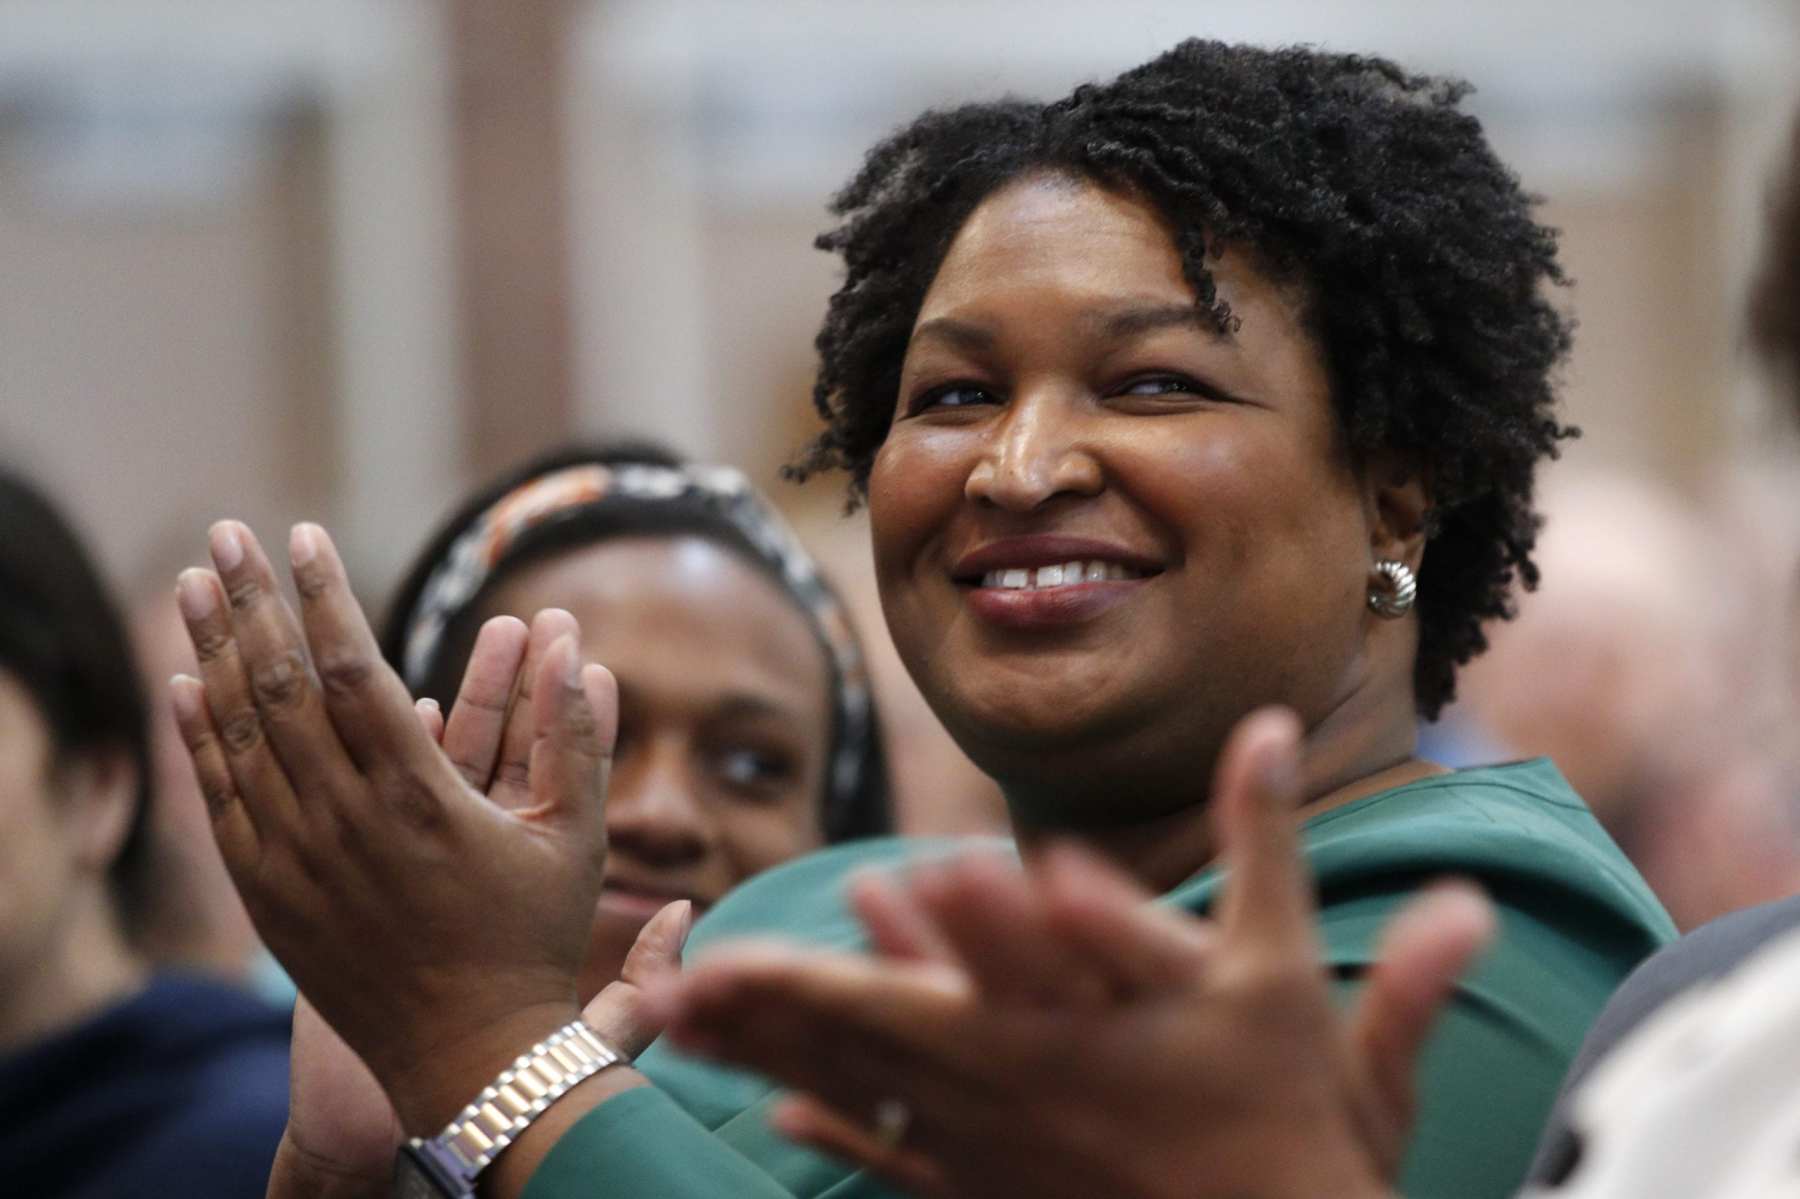 Stacey Abrams clapping in a crowd of people.